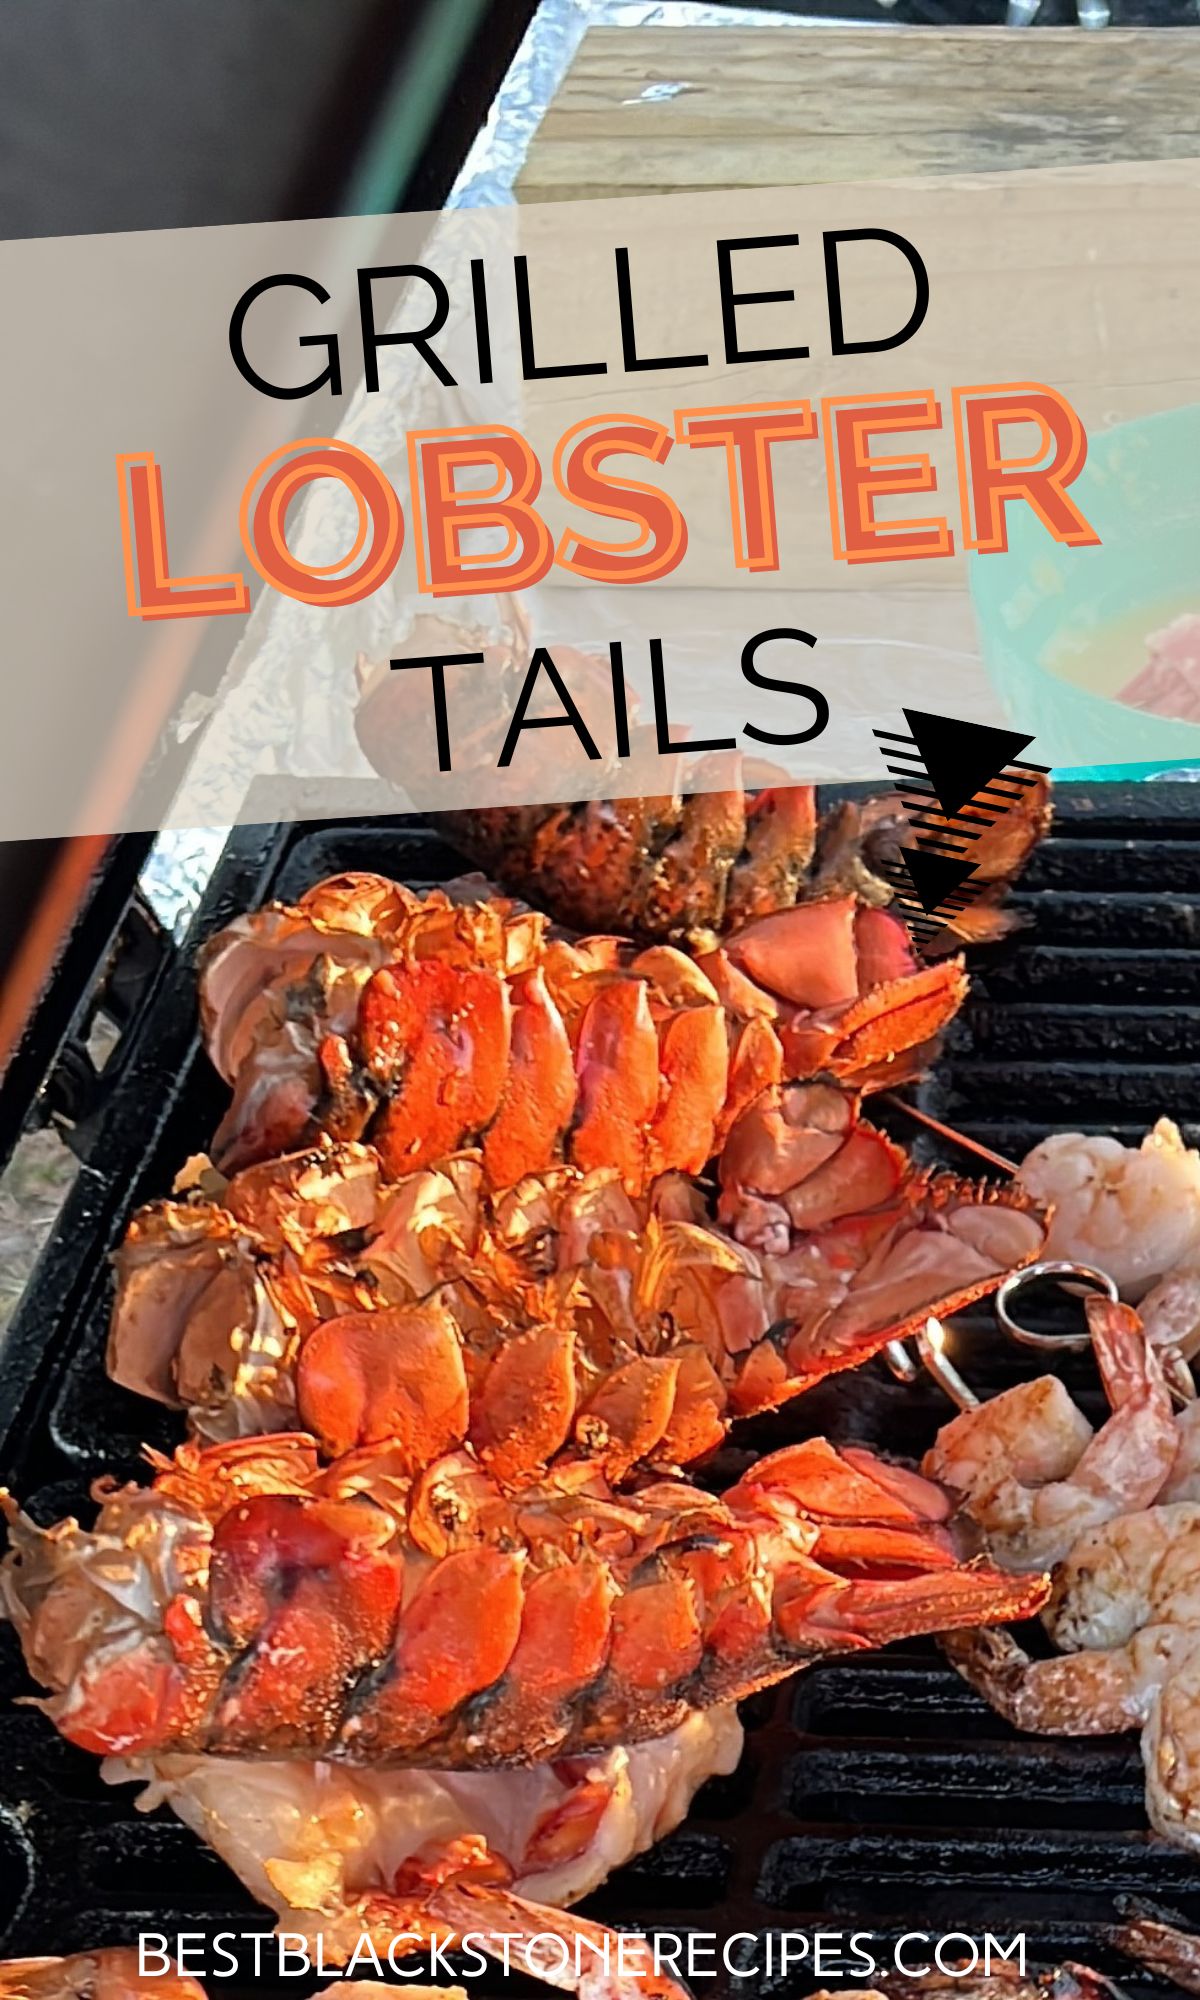 Blackstone Grilled Lobster Tails Recipe